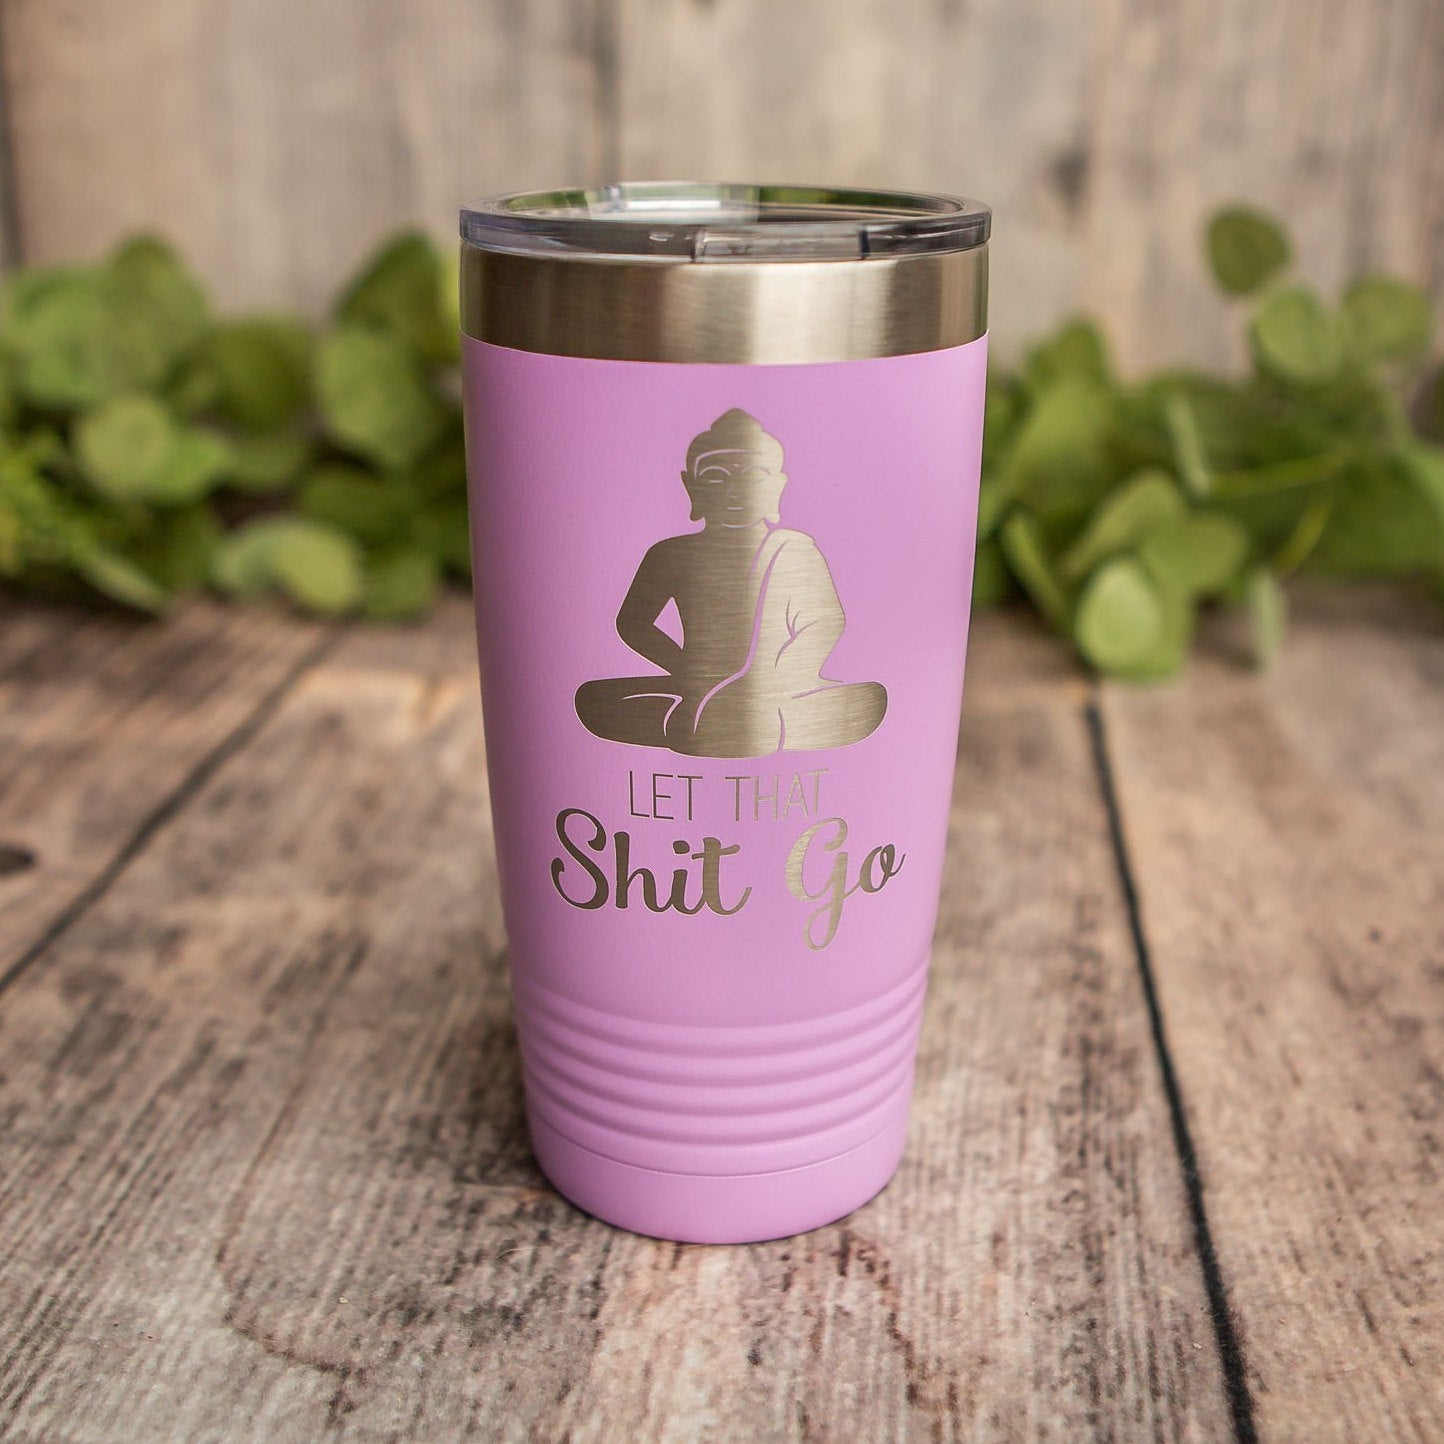 https://3cetching.com/wp-content/uploads/2020/09/let-that-shit-go-mature-engraved-stainless-steel-tumbler-insulated-mug-yoga-gift-5f5fa101.jpg